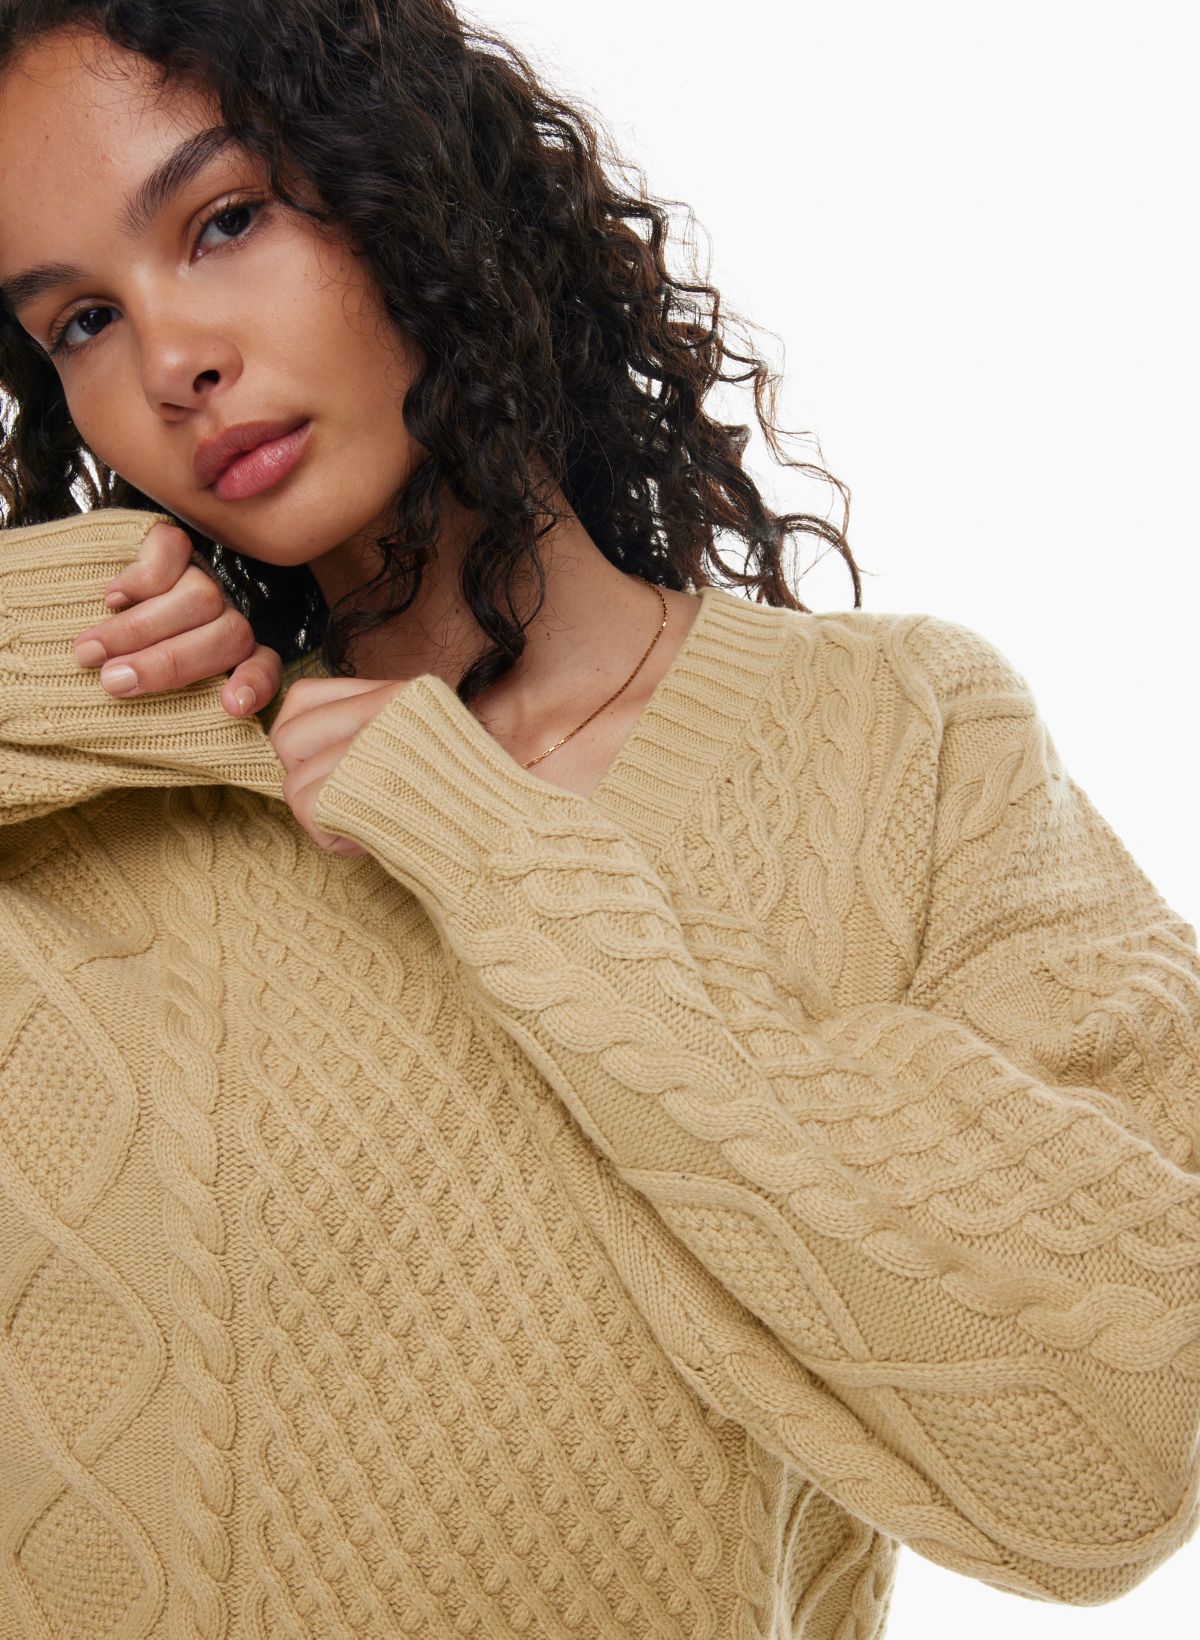 The Best Tan, Oversized Turtleneck Sweater to Dress Up or Down